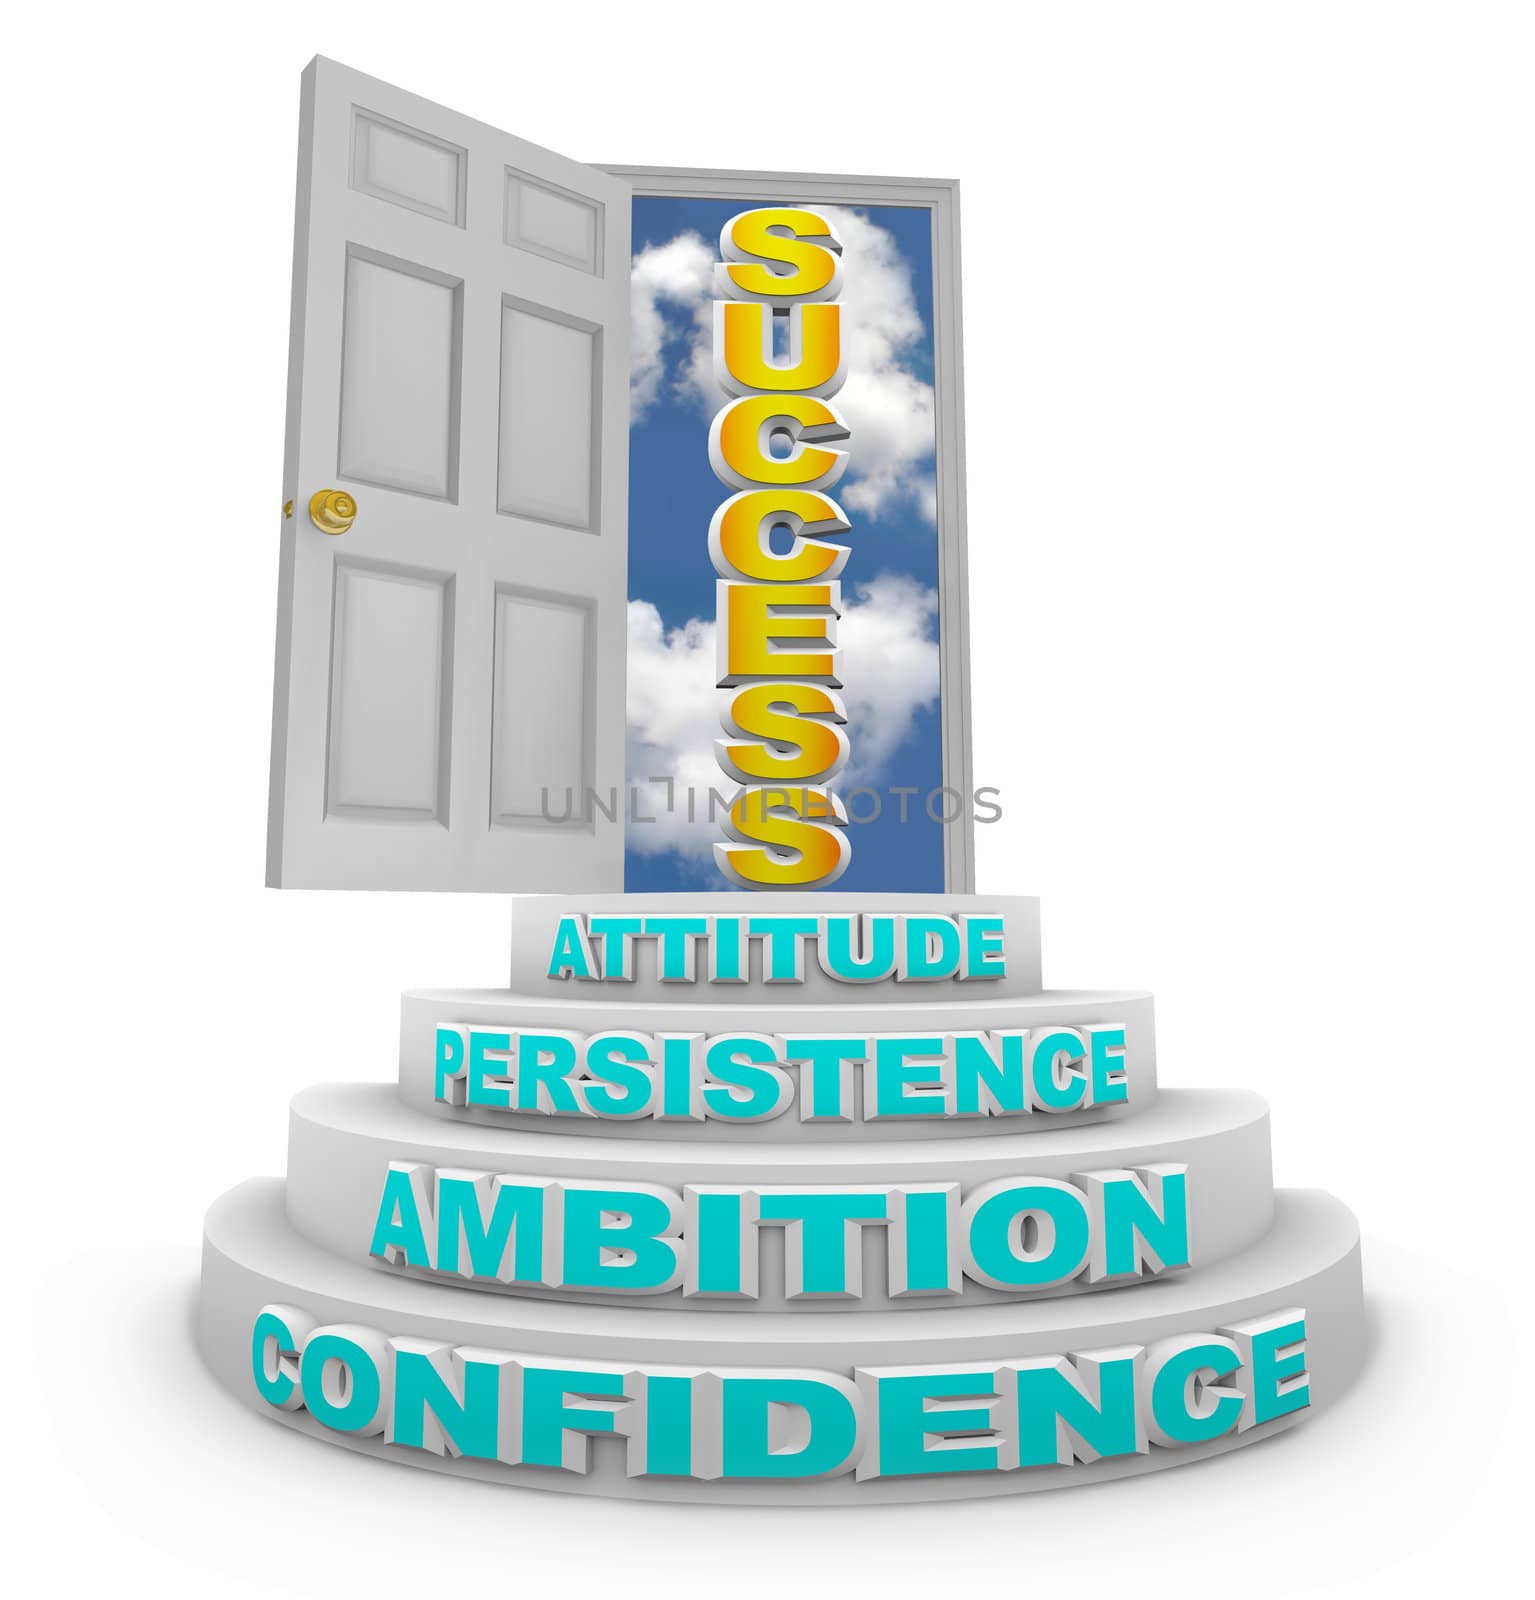 A series of steps with words - Confidence, Ambition, Persistence and Attitude - lead to an open door with the word Success showing through it